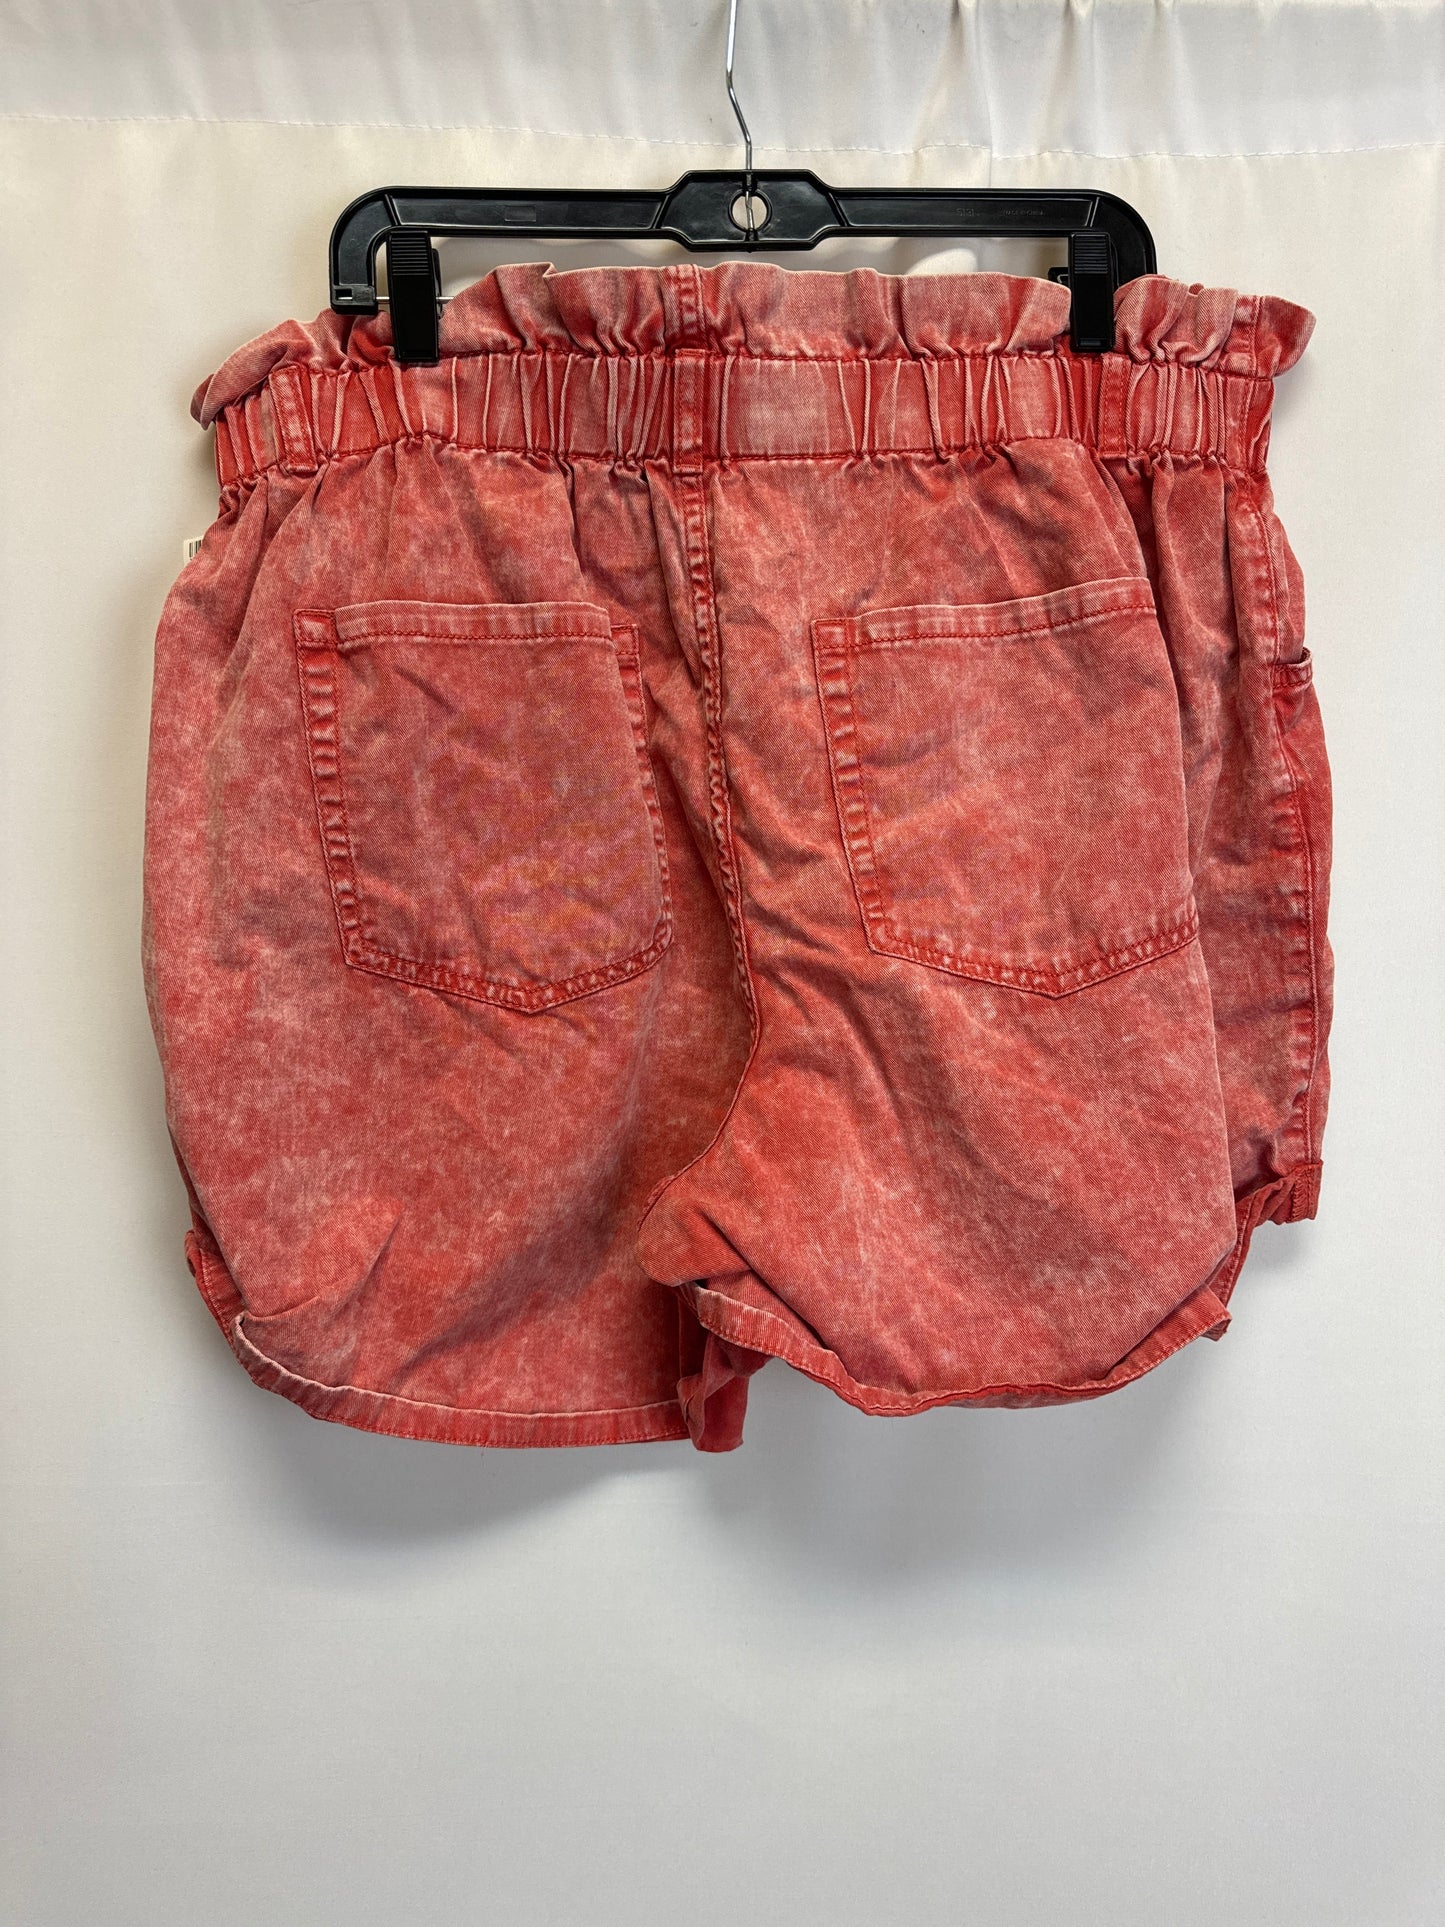 Shorts By Wild Fable  Size: Xxl